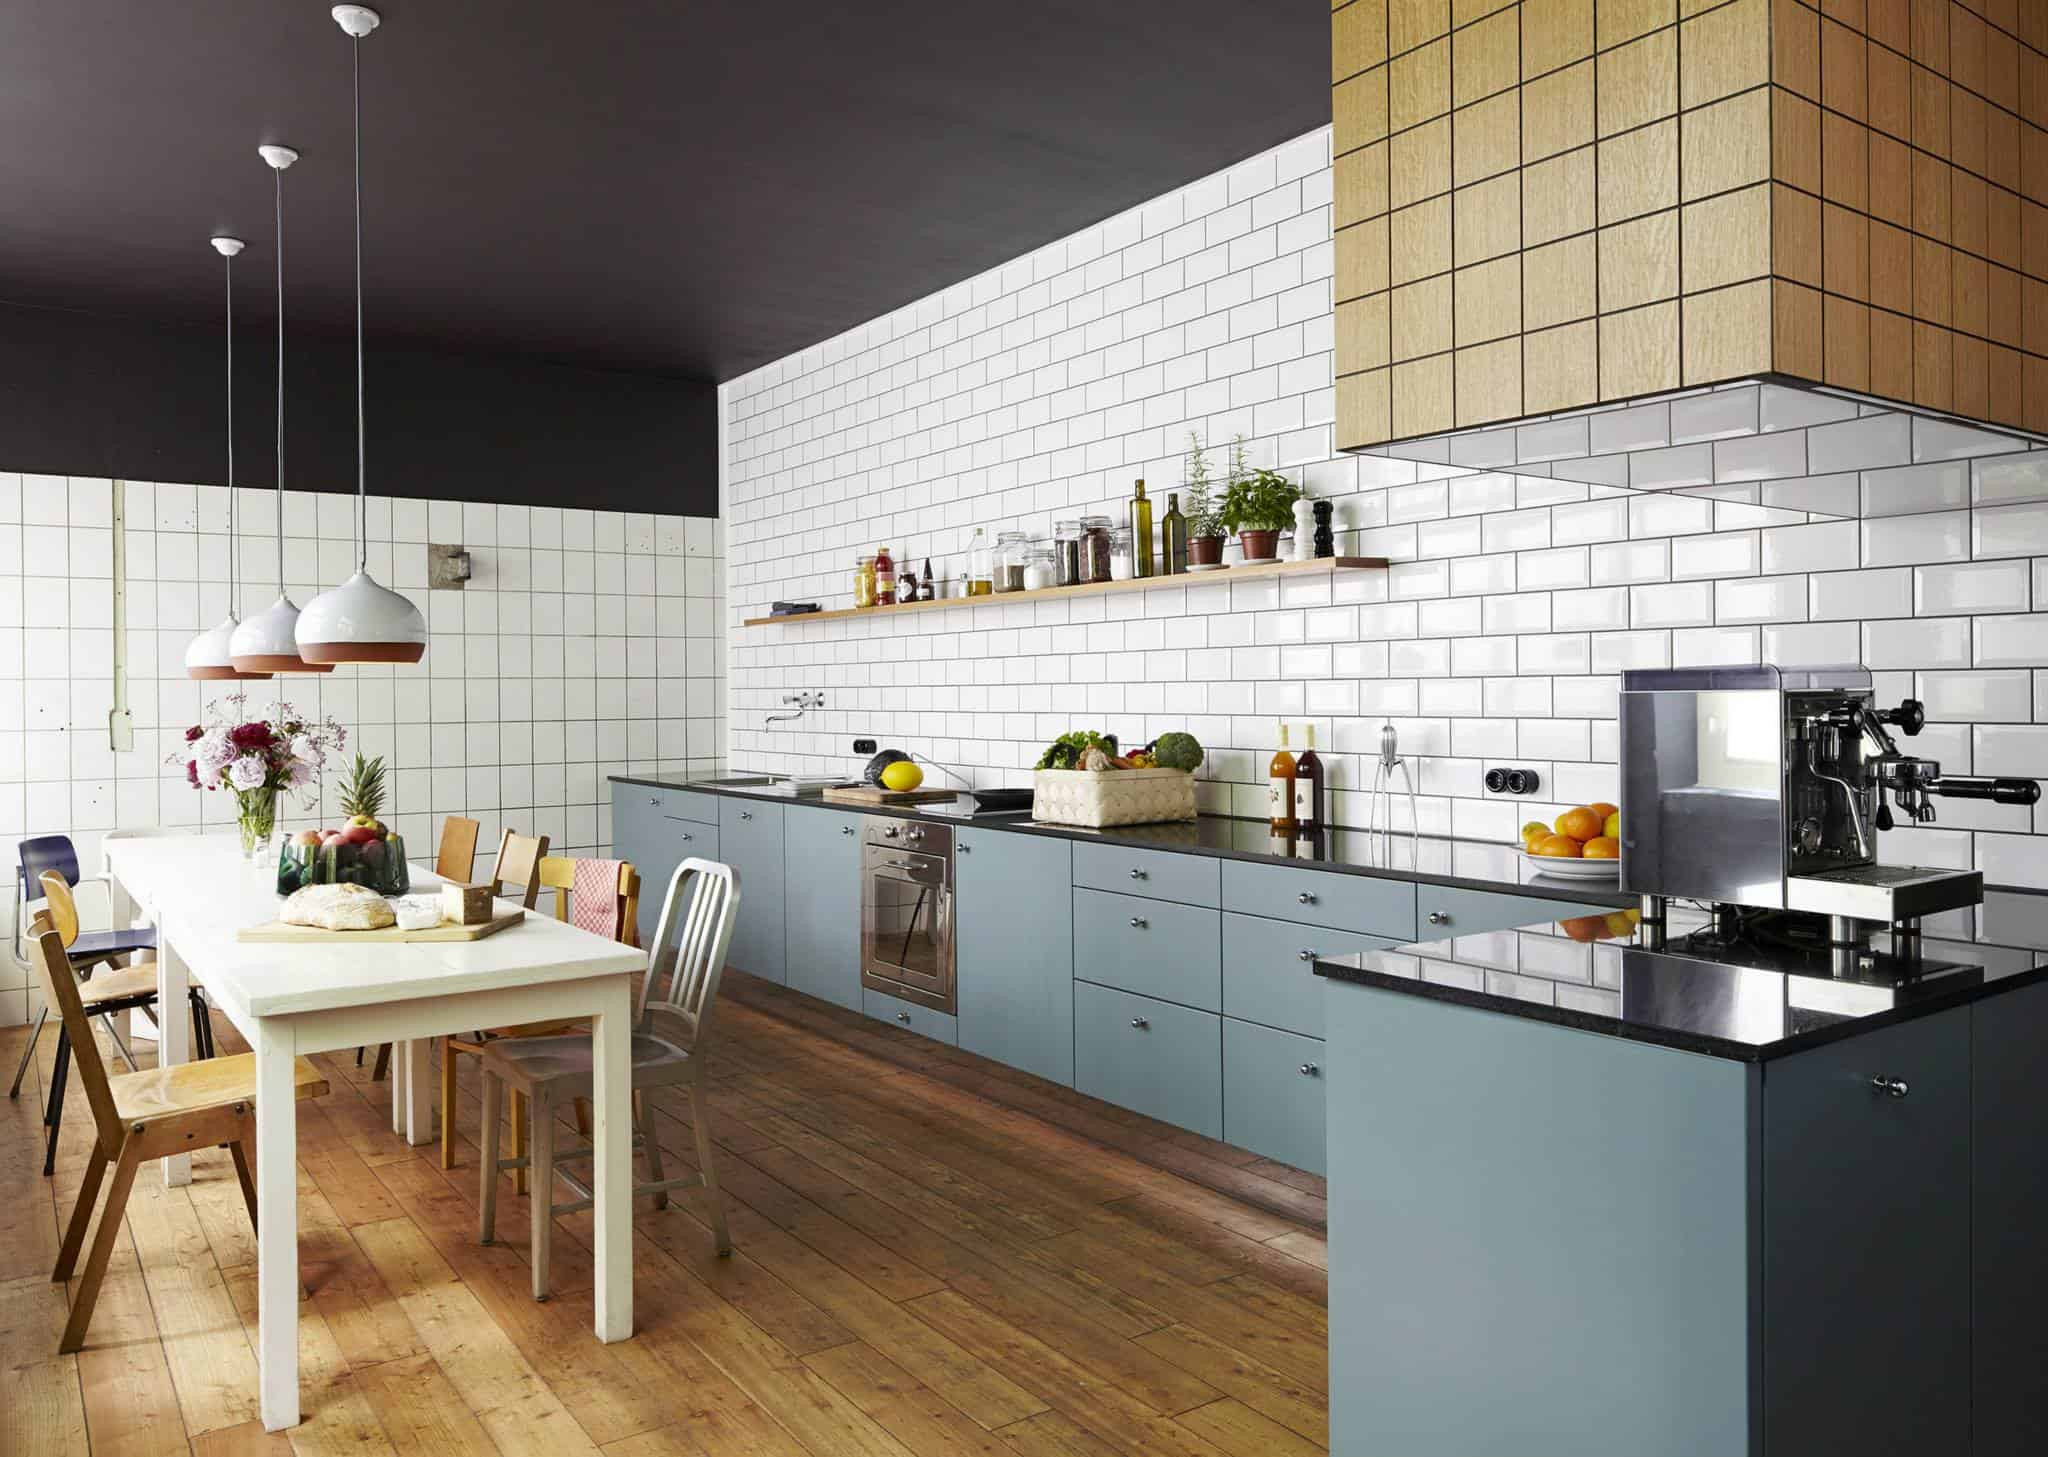 Subway Tile For Kitchen
 White Subway Tile Kitchen Designs are Incredibly Universal